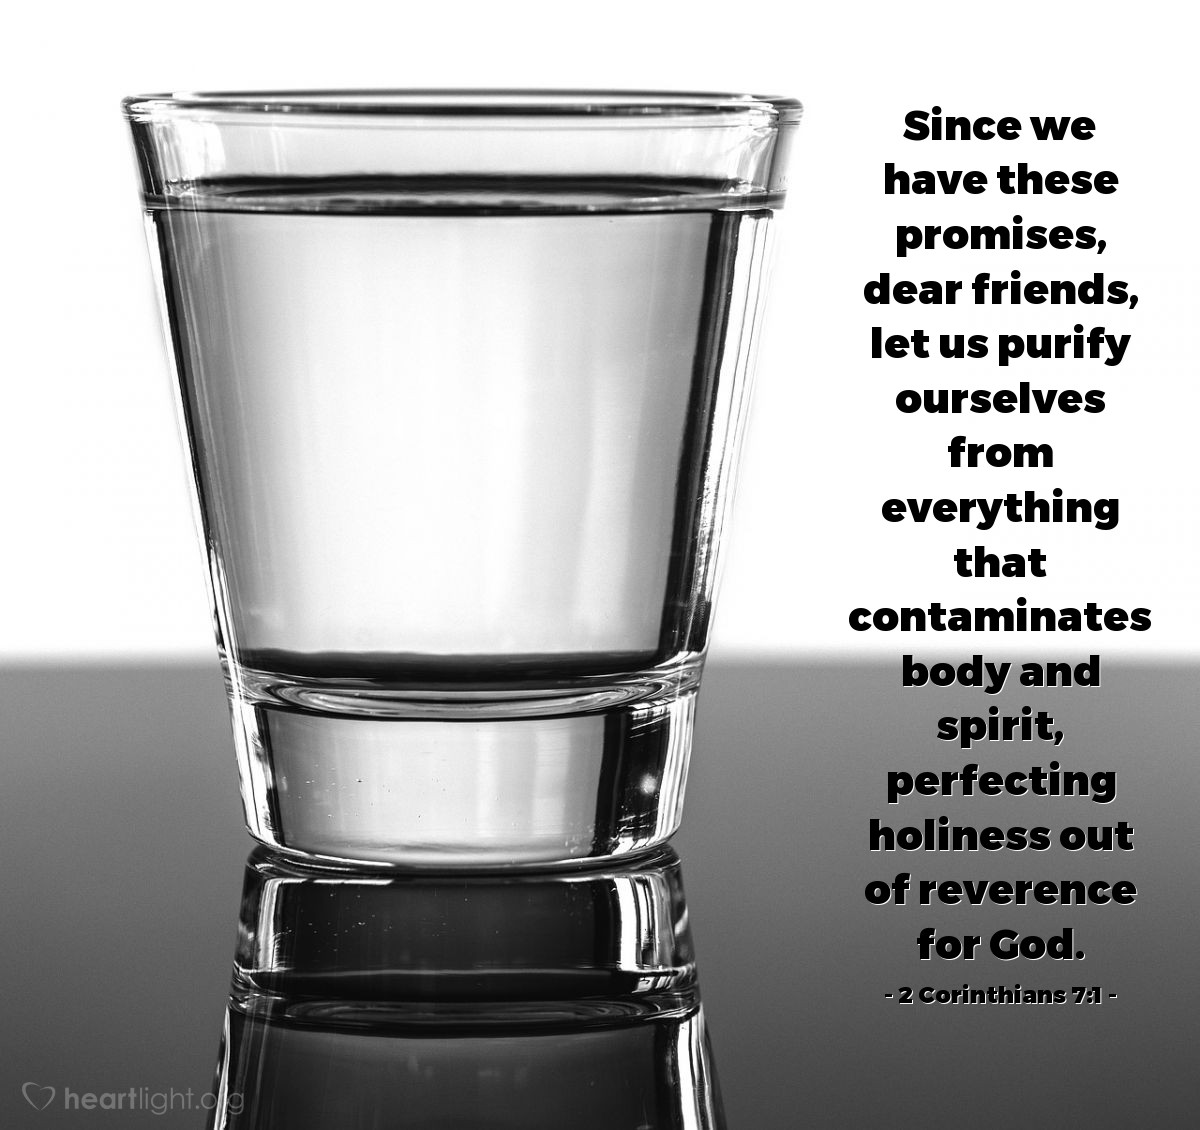 Since we have these promises, dear friends, let us purify ourselves from everything that contaminate